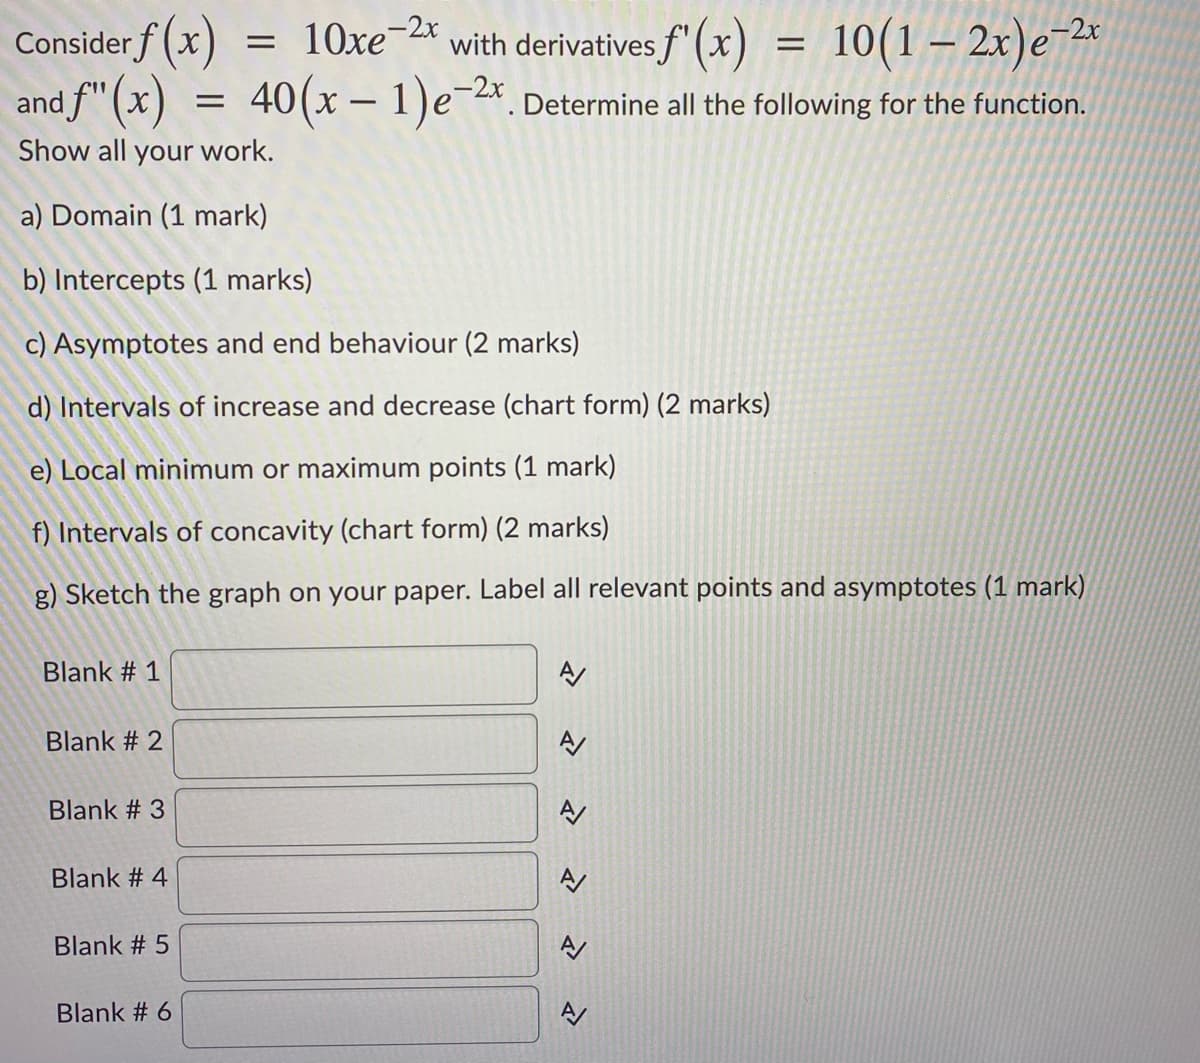 Consider f (x)
10xe-2x
with derivatives f'(x)
10(1 – 2x)e-2*
%D
and f" (x)
40(x – 1)e-*. Determine all the following for the function.
Show all your work.
a) Domain (1 mark)
b) Intercepts (1 marks)
c) Asymptotes and end behaviour (2 marks)
d) Intervals of increase and decrease (chart form) (2 marks)
e) Local minimum or maximum points (1 mark)
f) Intervals of concavity (chart form) (2 marks)
g) Sketch the graph on your paper. Label all relevant points and asymptotes (1 mark)
Blank # 1
Blank # 2
Blank # 3
Blank # 4
Blank # 5
Blank # 6
